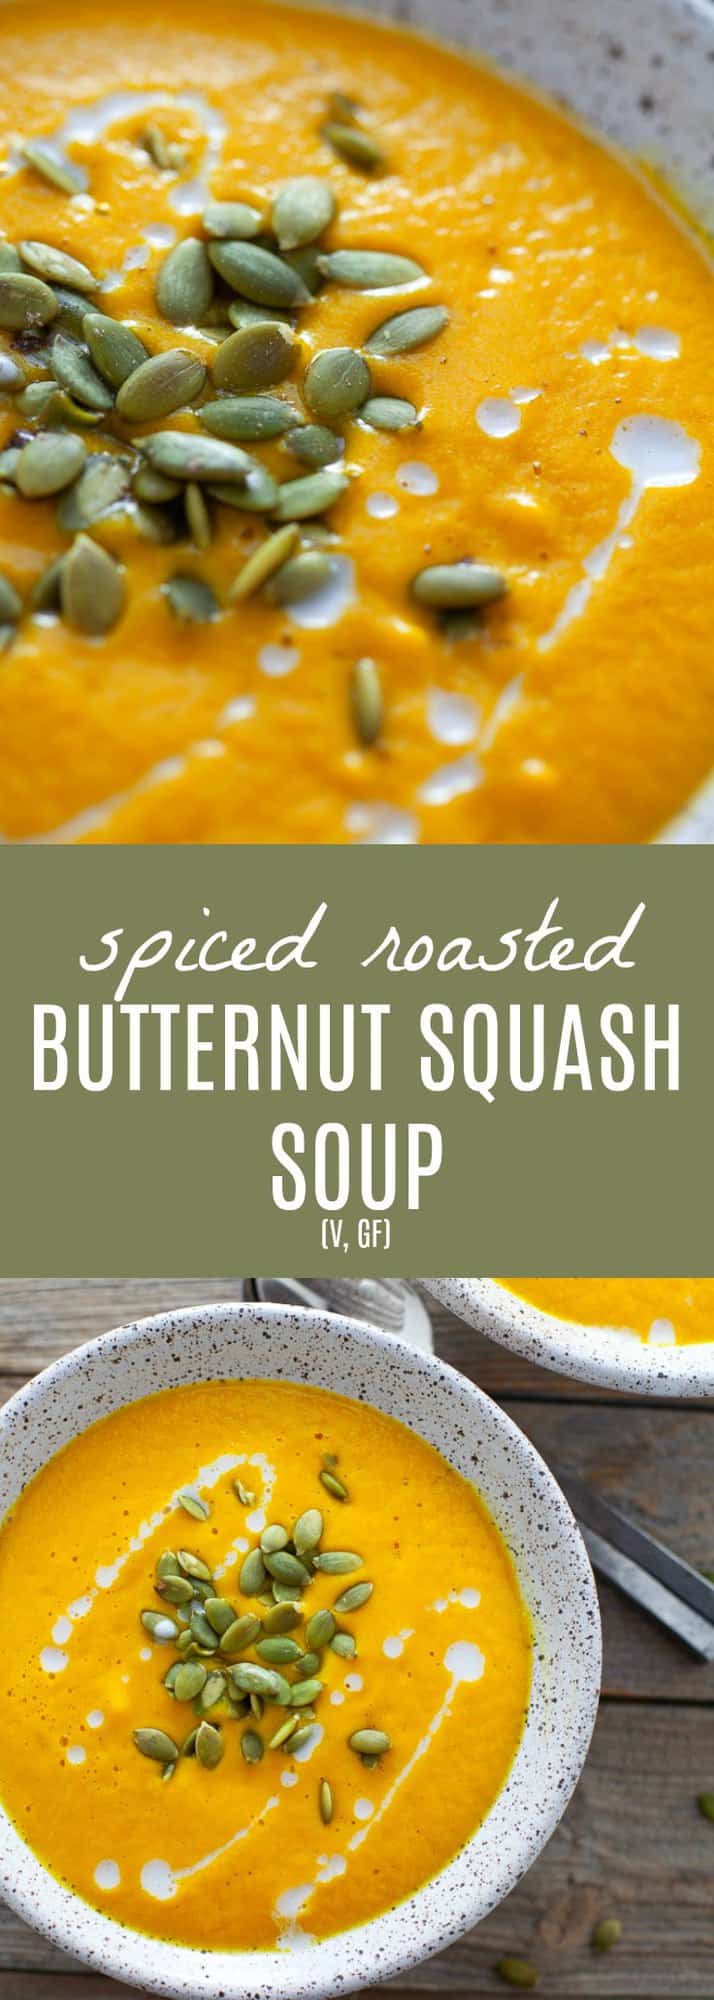 The perfect starter for the holidays, this vegan spiced roasted butternut squash soup is super creamy and has a hint of warming spice from cardamom. Easy to make in a high-speed blender or on the stove-top! #butternutsqaush #vegan #soup